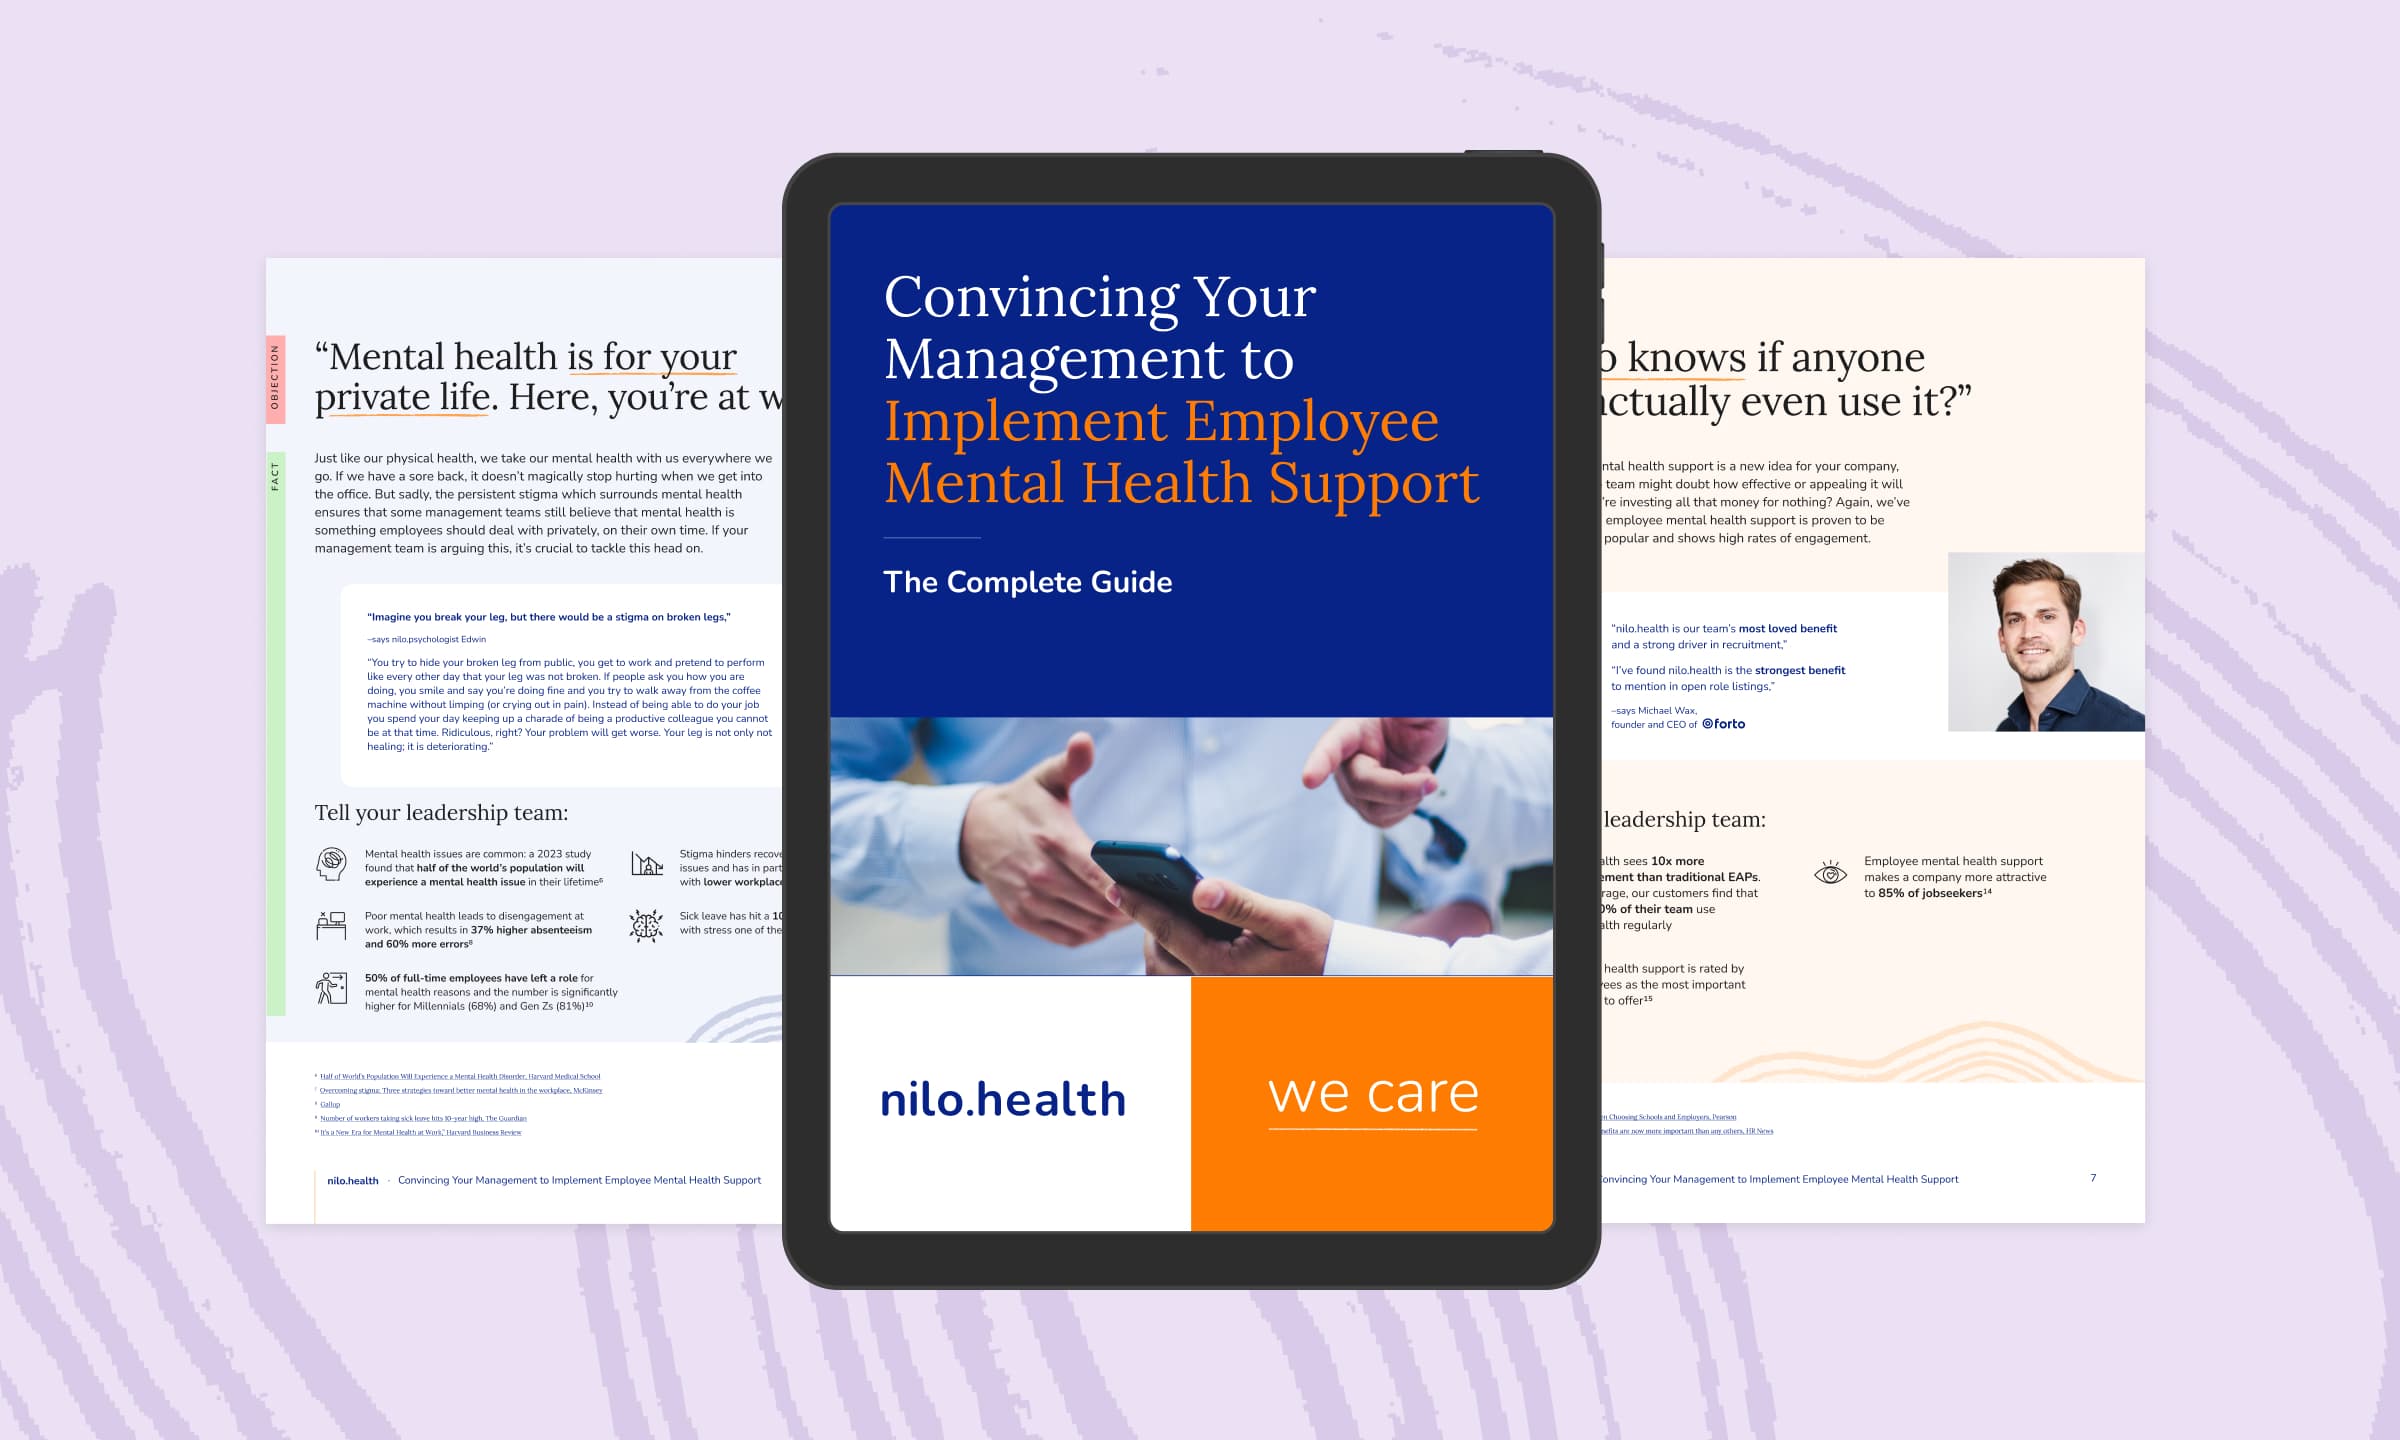 How to convince your management of a mental health benefit